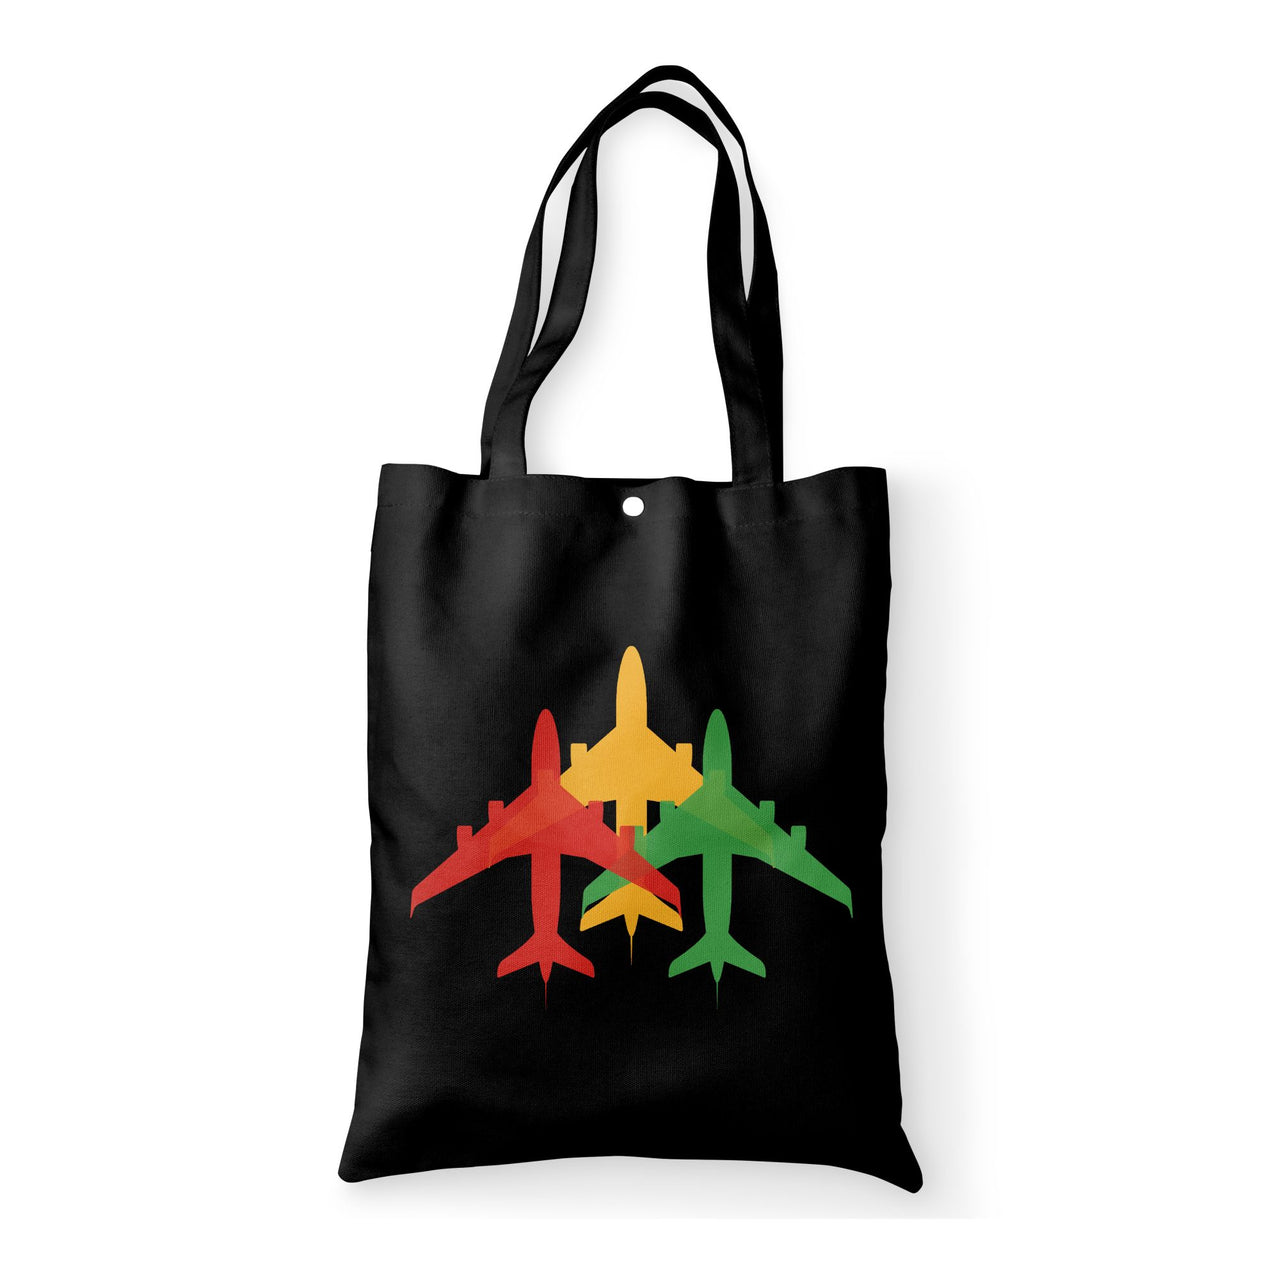 Colourful 3 Airplanes Designed Tote Bags